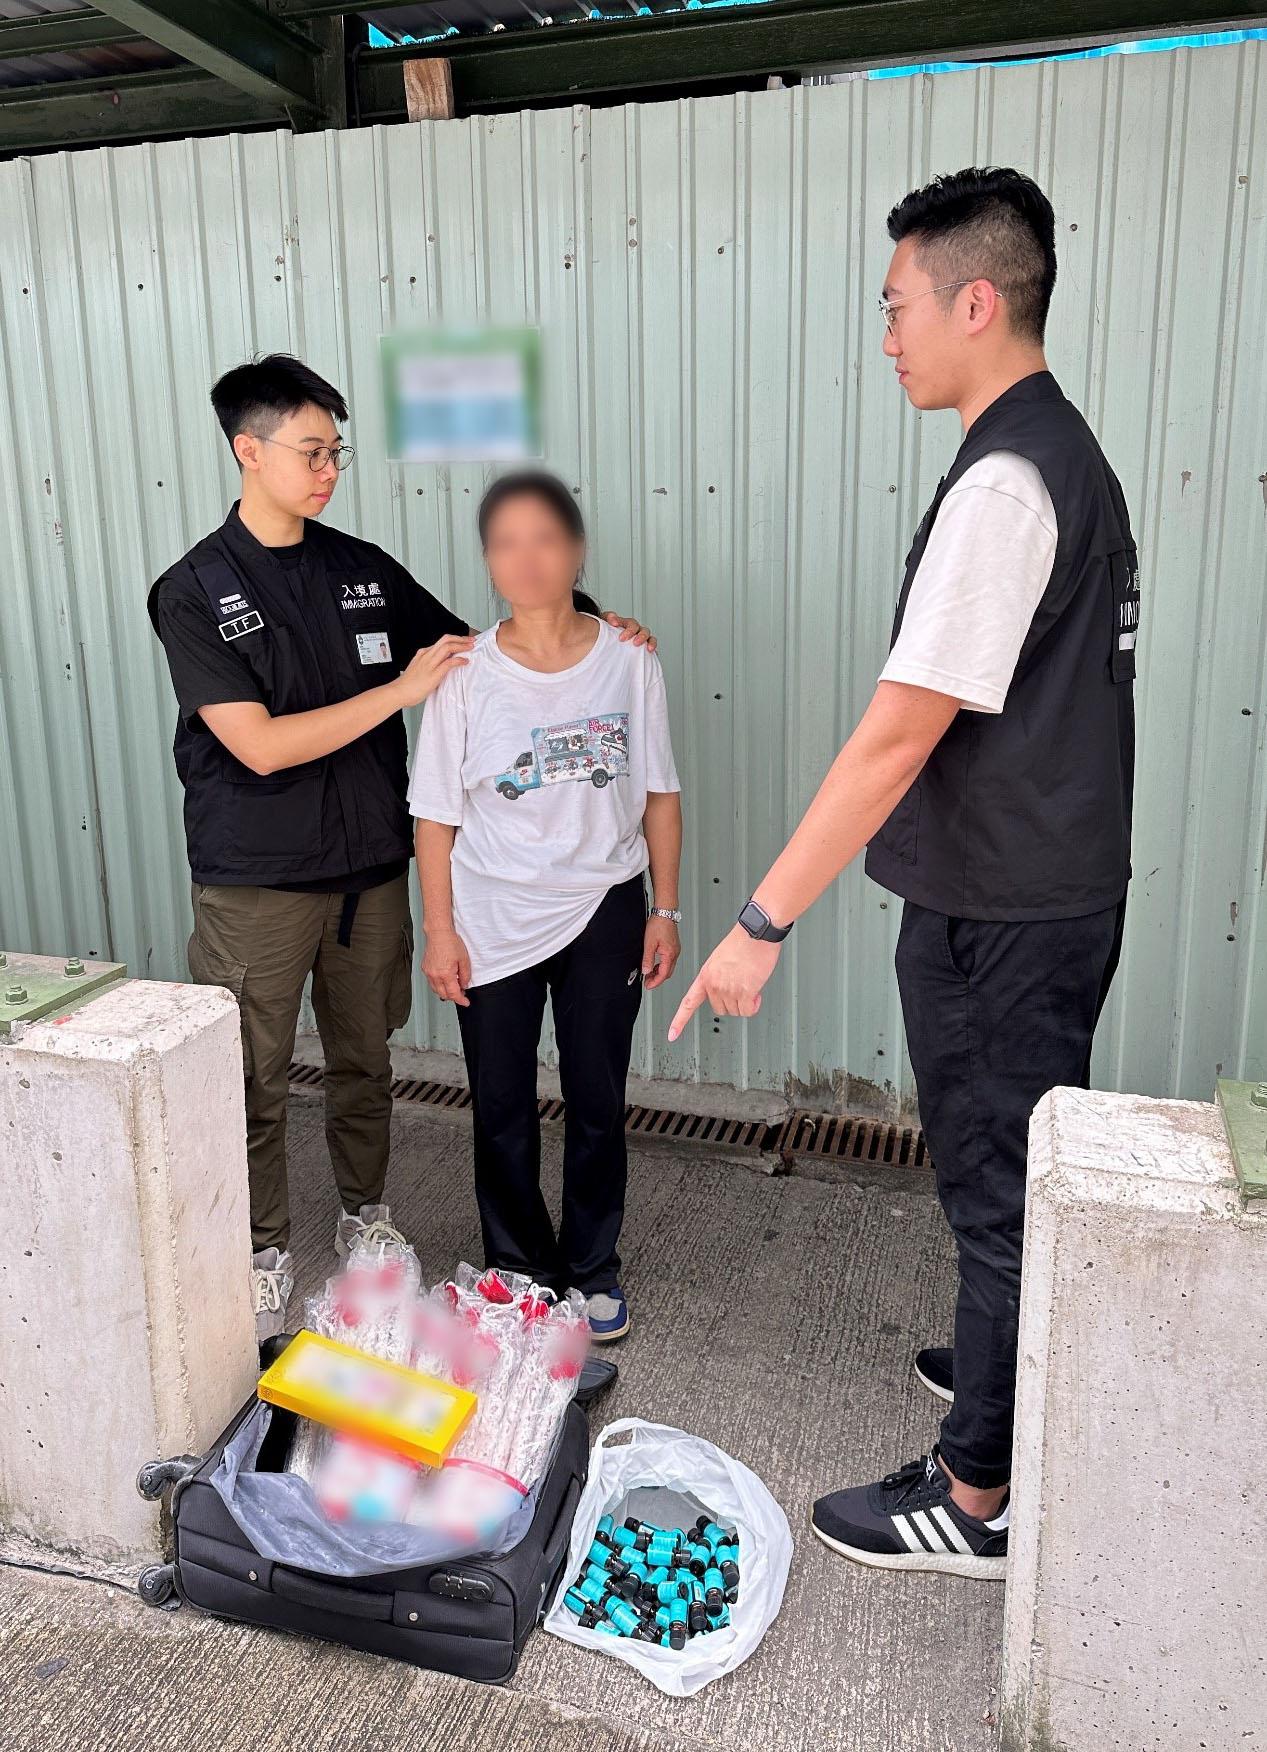 The Immigration Department mounted a series of territory-wide anti-illegal worker operations codenamed "Twilight", and a joint operation with the Hong Kong Police Force codenamed "Windsand" for four consecutive days from August 14 to yesterday (August 17). Photo shows a Mainland visitor involved in suspected parallel trading activities and her goods.